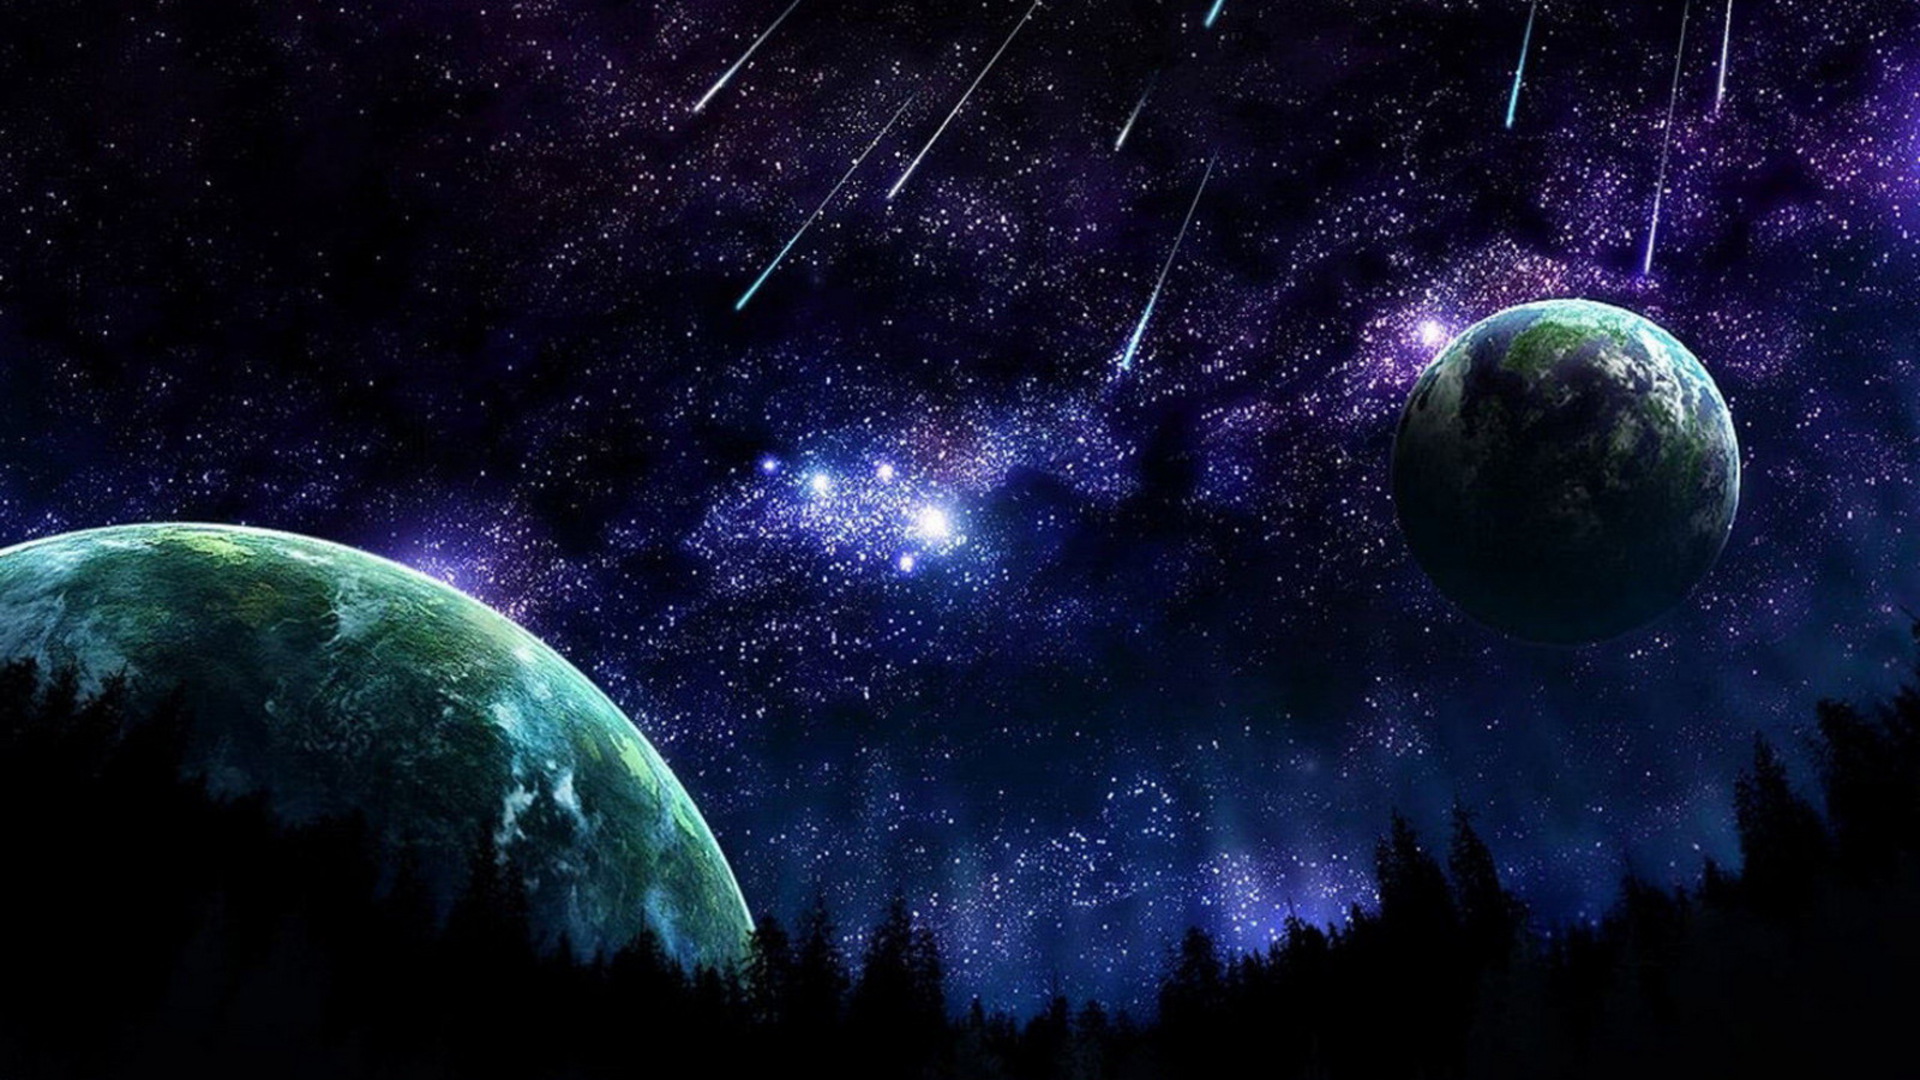 49+] HD Outer Space Wallpapers - WallpaperSafari